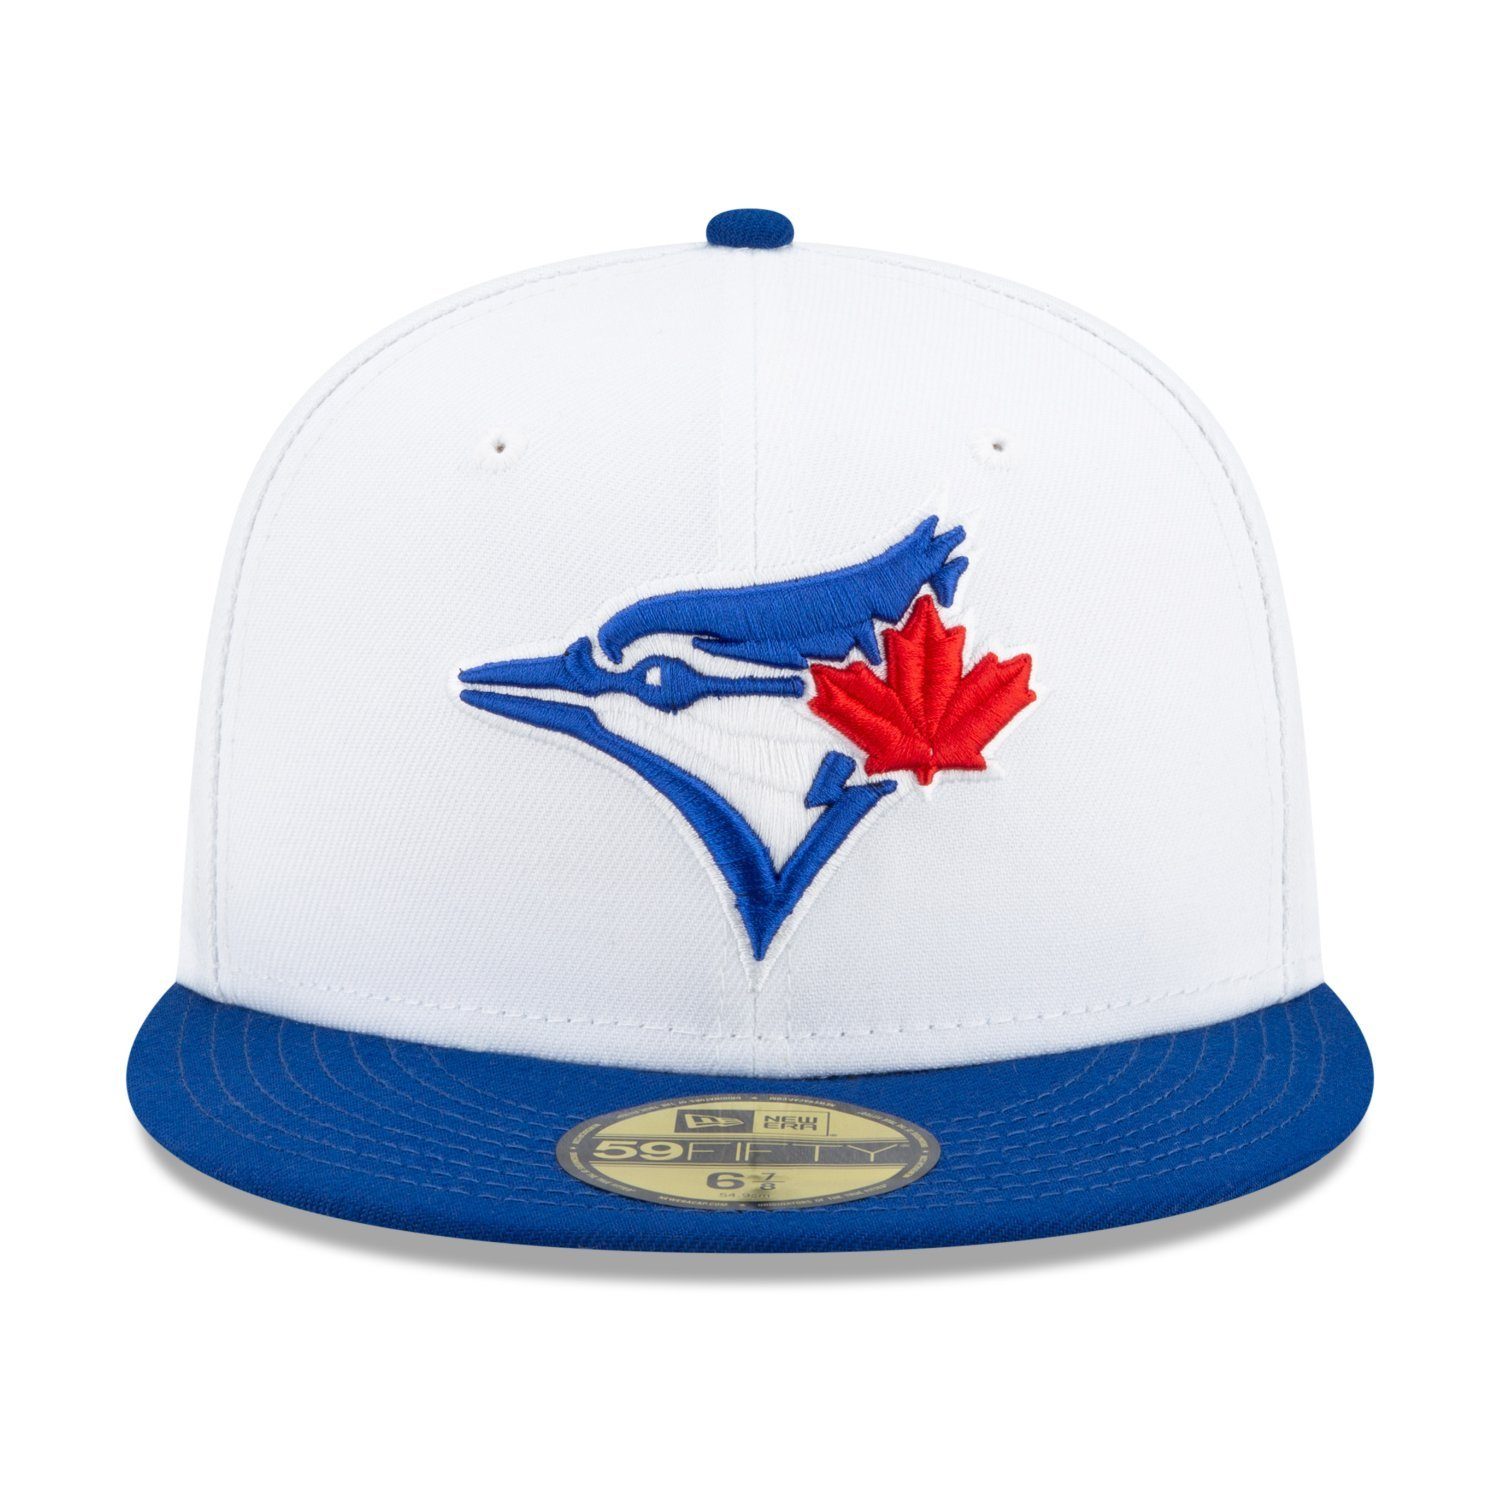 New 59Fifty Toronto Era WORLD Jays 1993 SERIES Fitted Cap